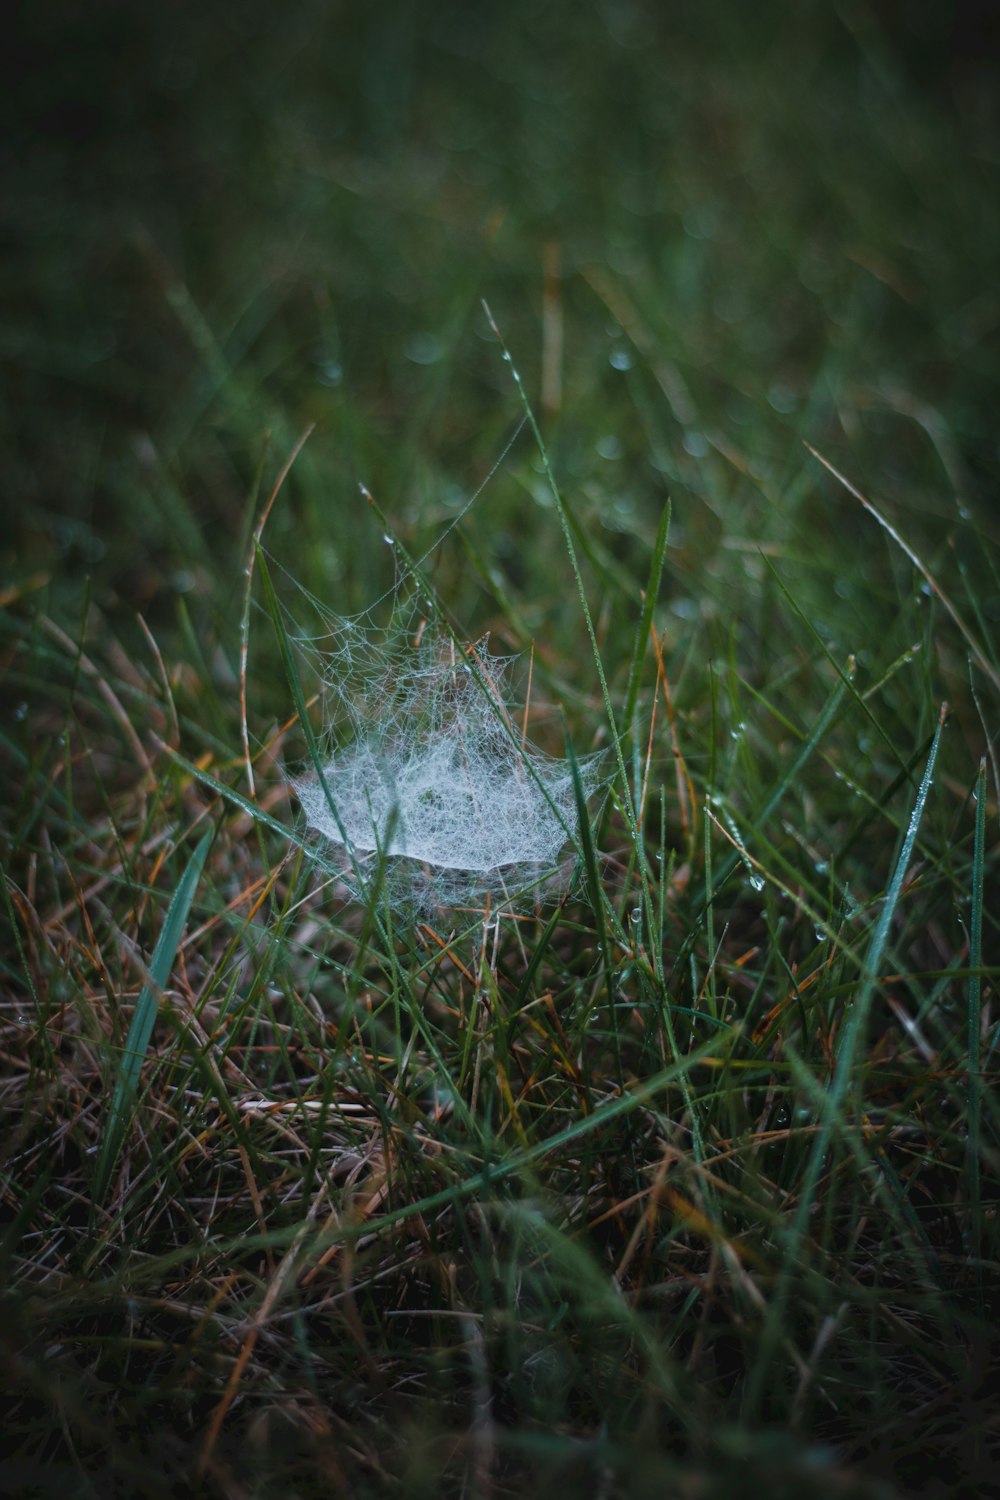 a spider web on the ground in the grass